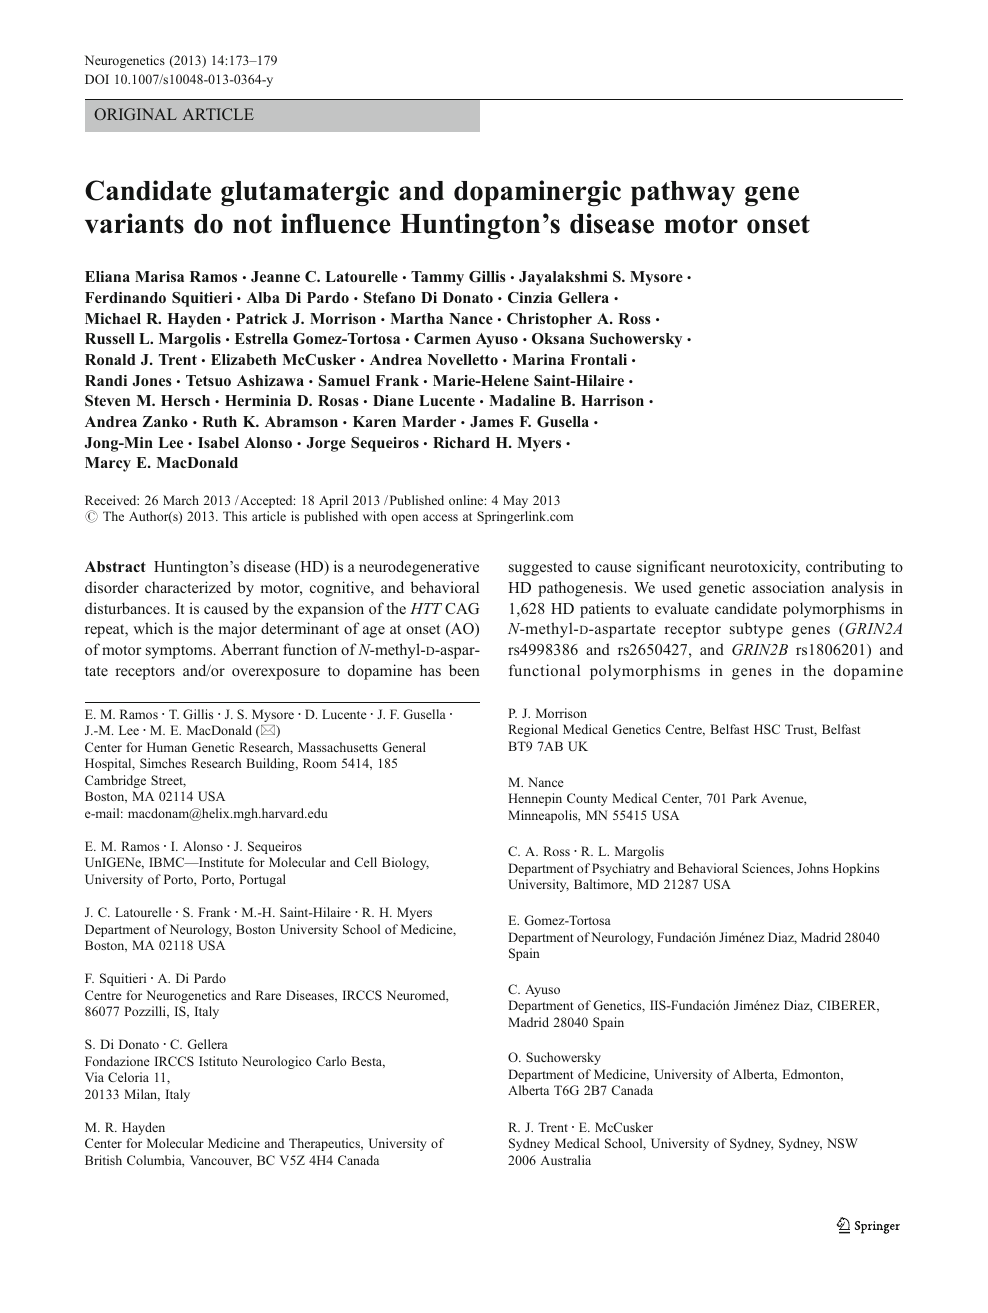 Candidate Glutamatergic And Dopaminergic Pathway Gene Variants Do Not Influence Huntington S Disease Motor Onset Topic Of Research Paper In Biological Sciences Download Scholarly Article Pdf And Read For Free On Cyberleninka